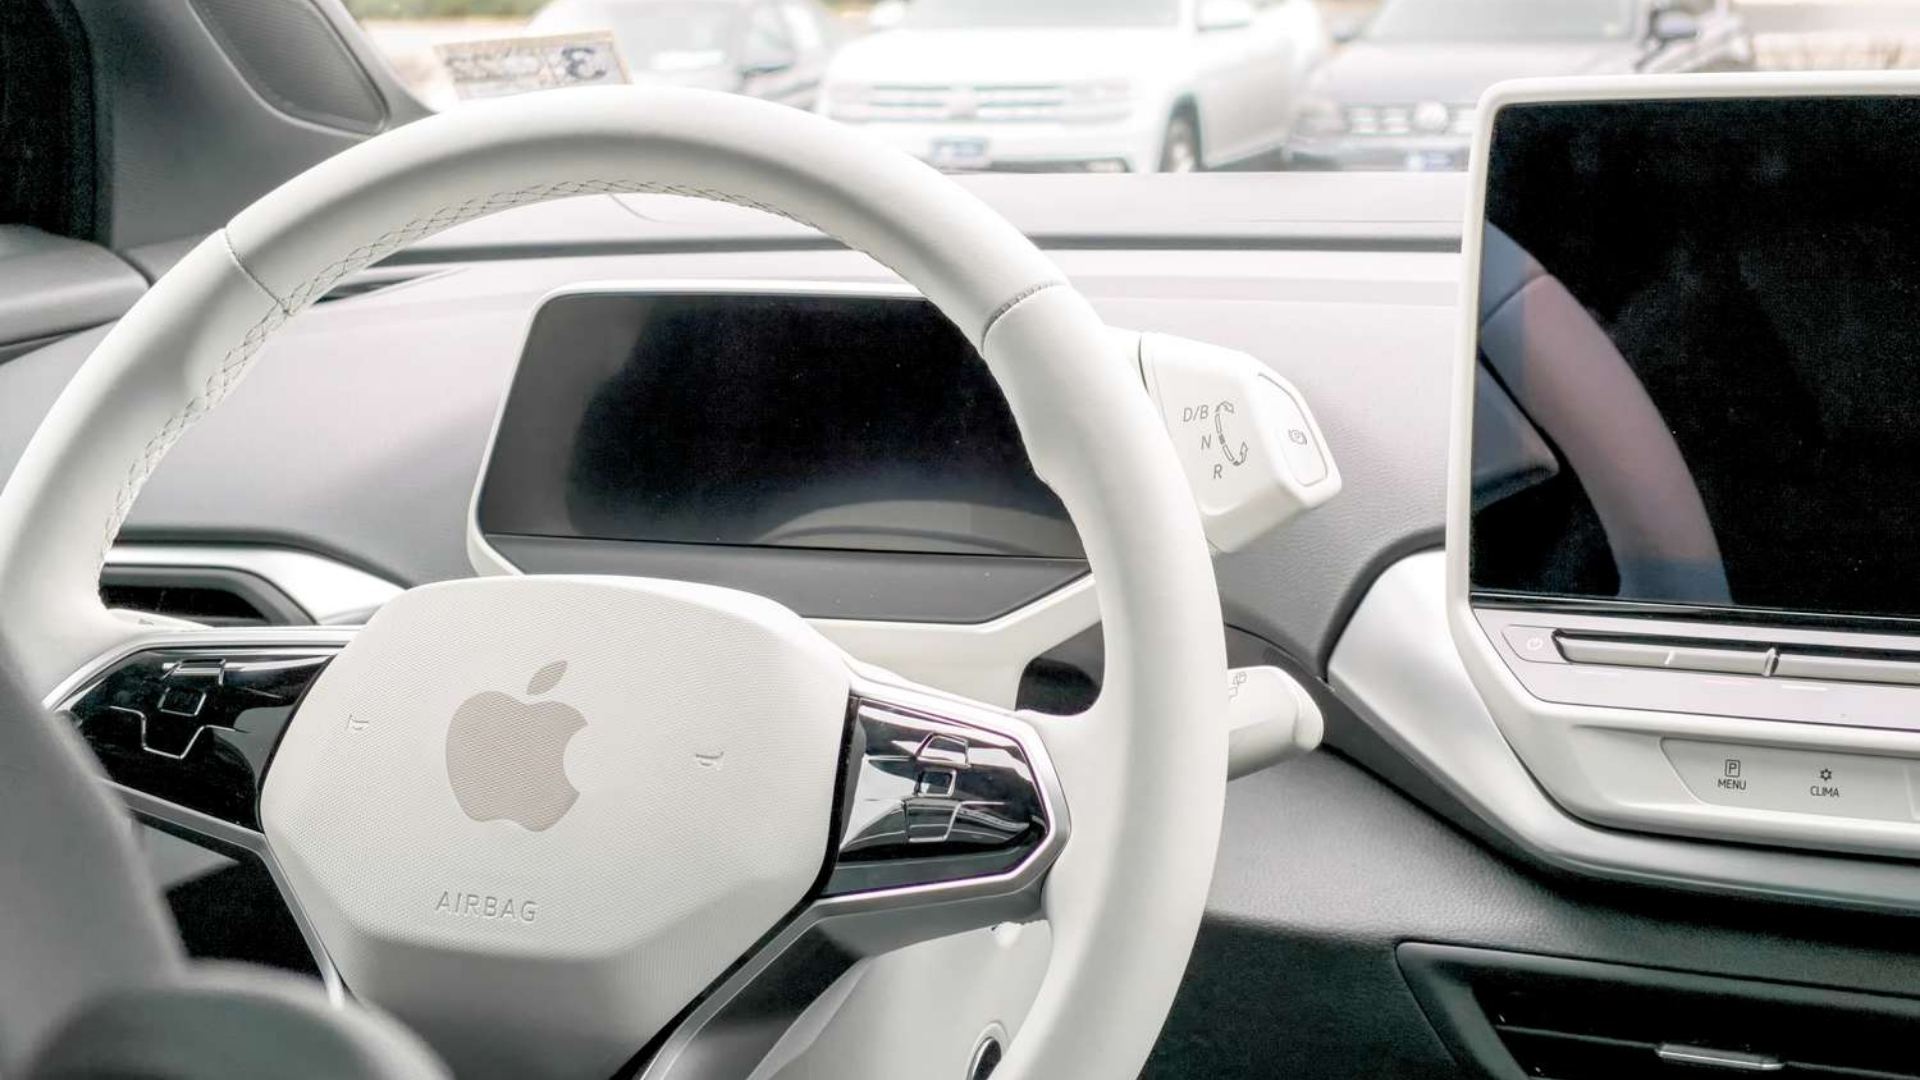 apple car, project titan, why was it cancelled, apple, xiaomi, tesla